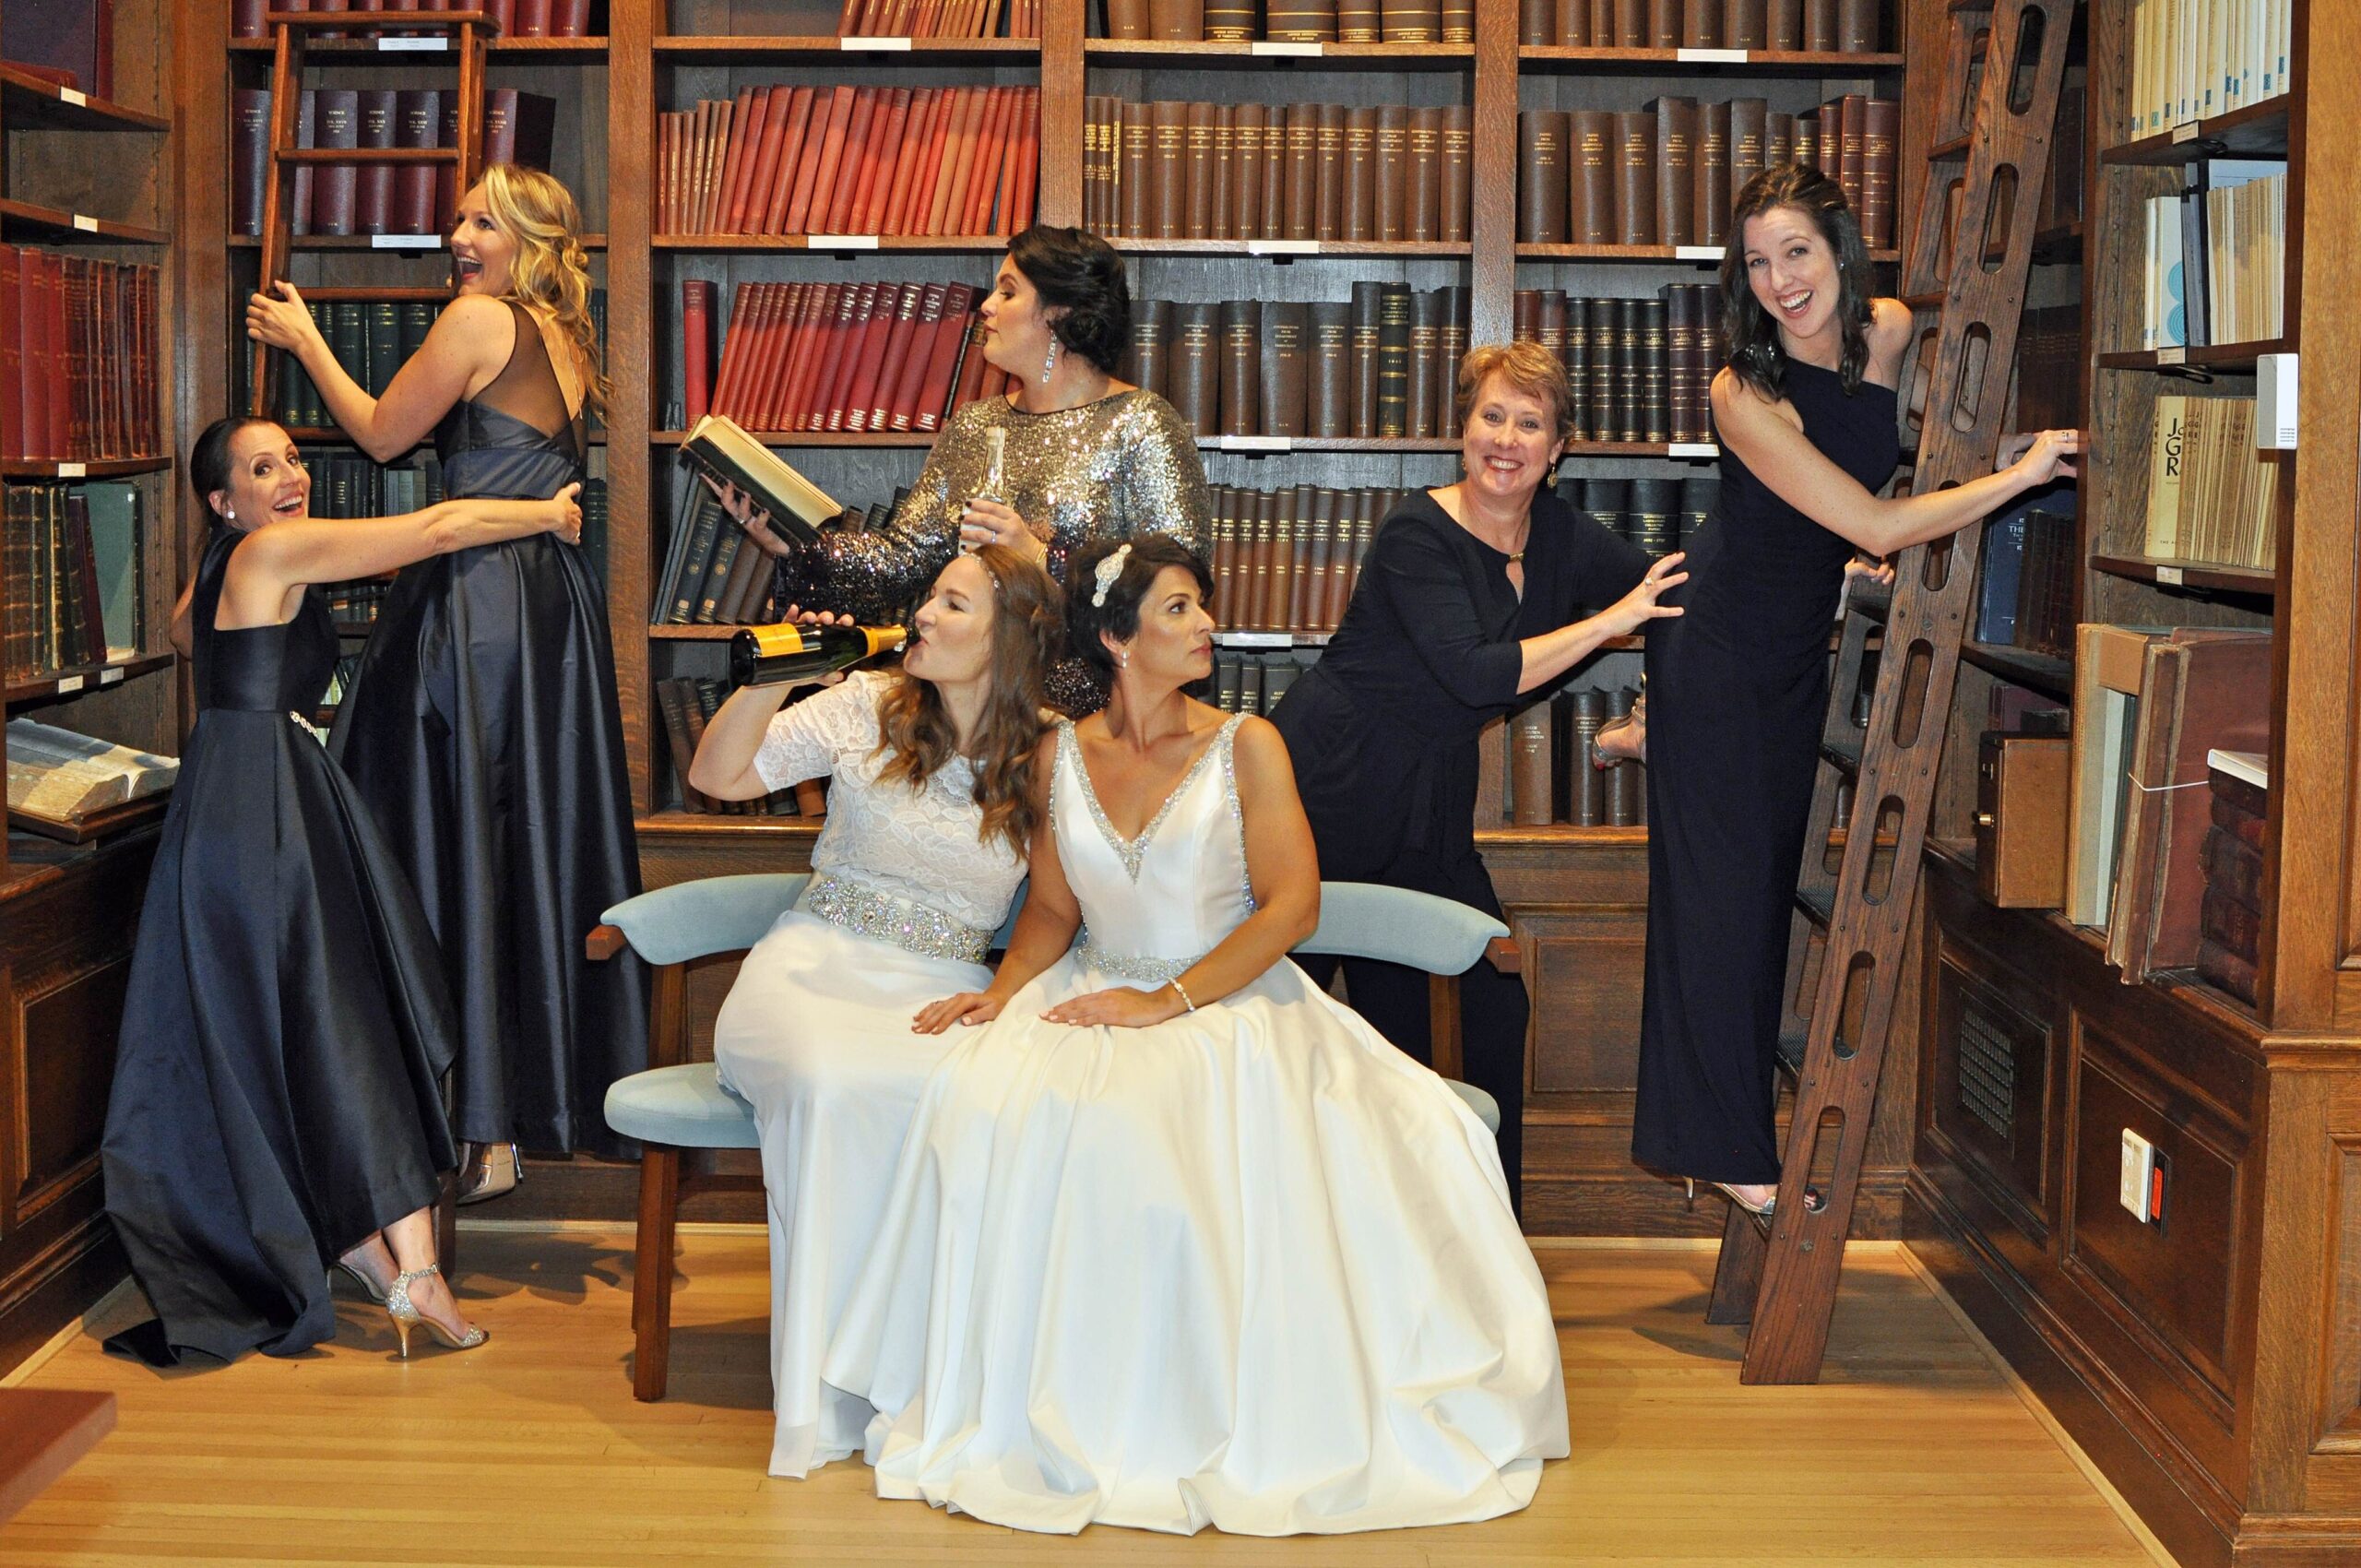 Teacher Bride-to-Be sitting on a bench in a library with her bridesmaids surrounding her.